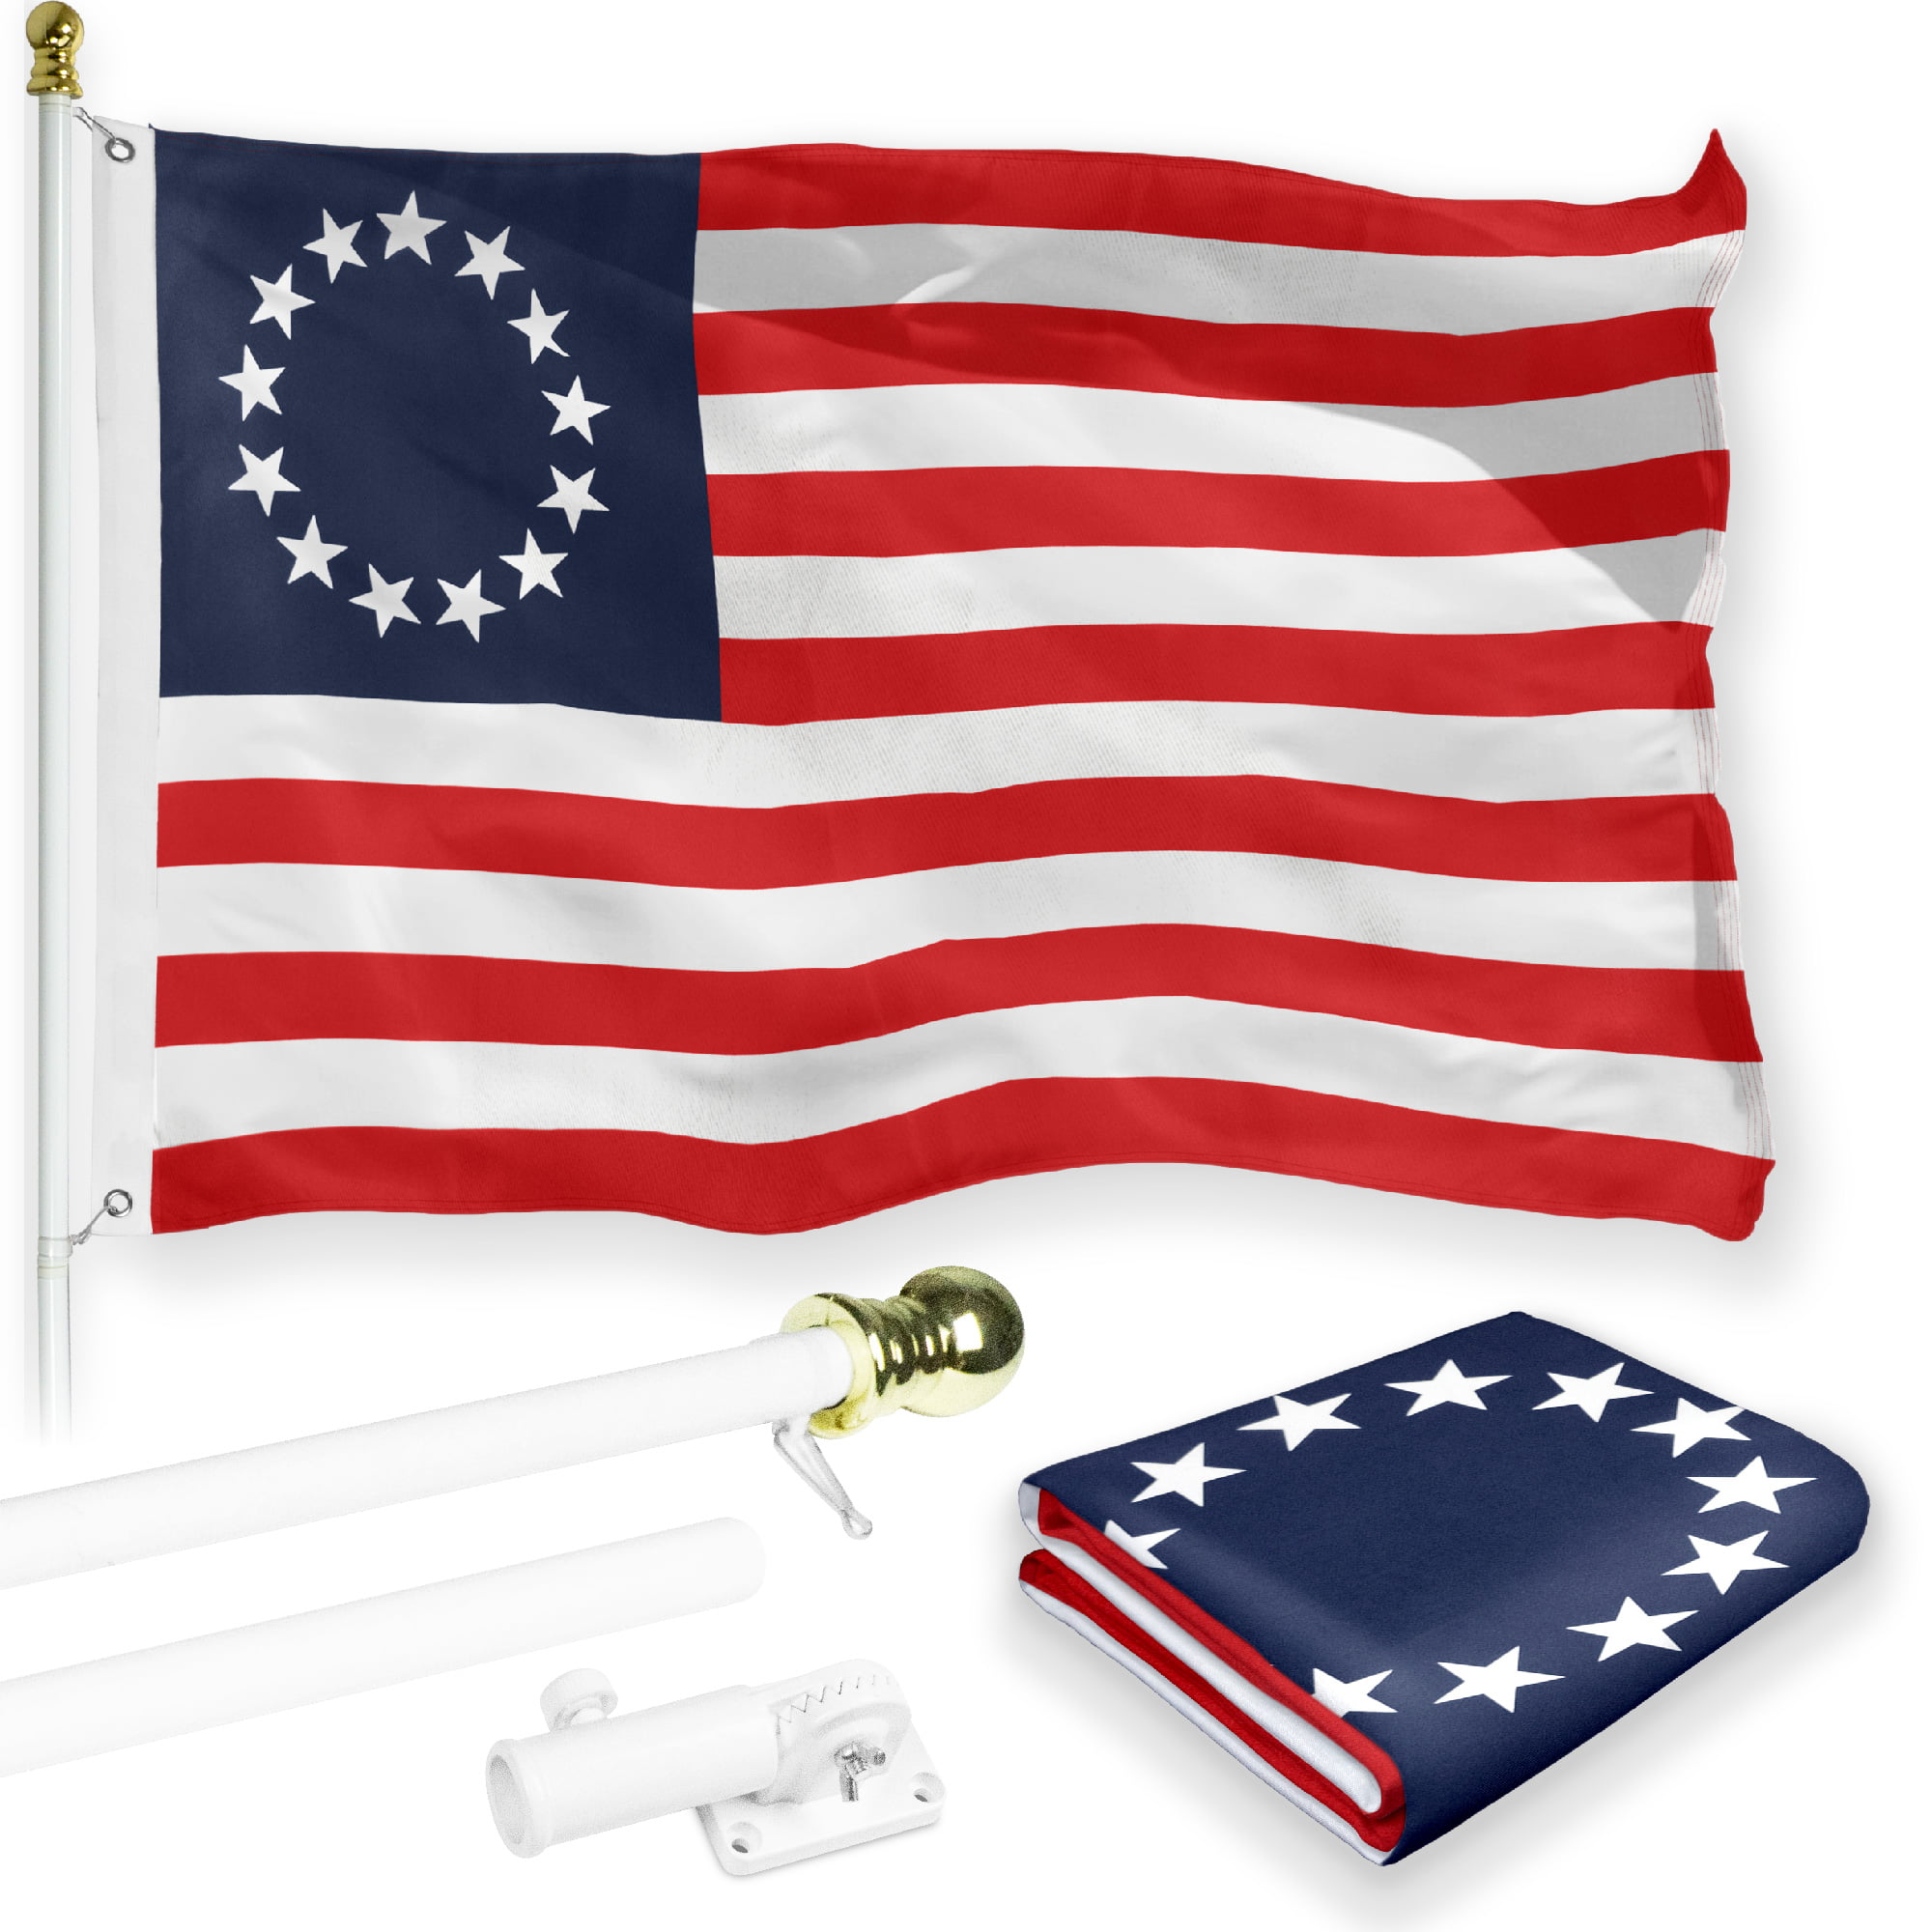 USA American Flag & Betsy Ross Flag 3x5 ft 150D Printed G128 Combo Pack 